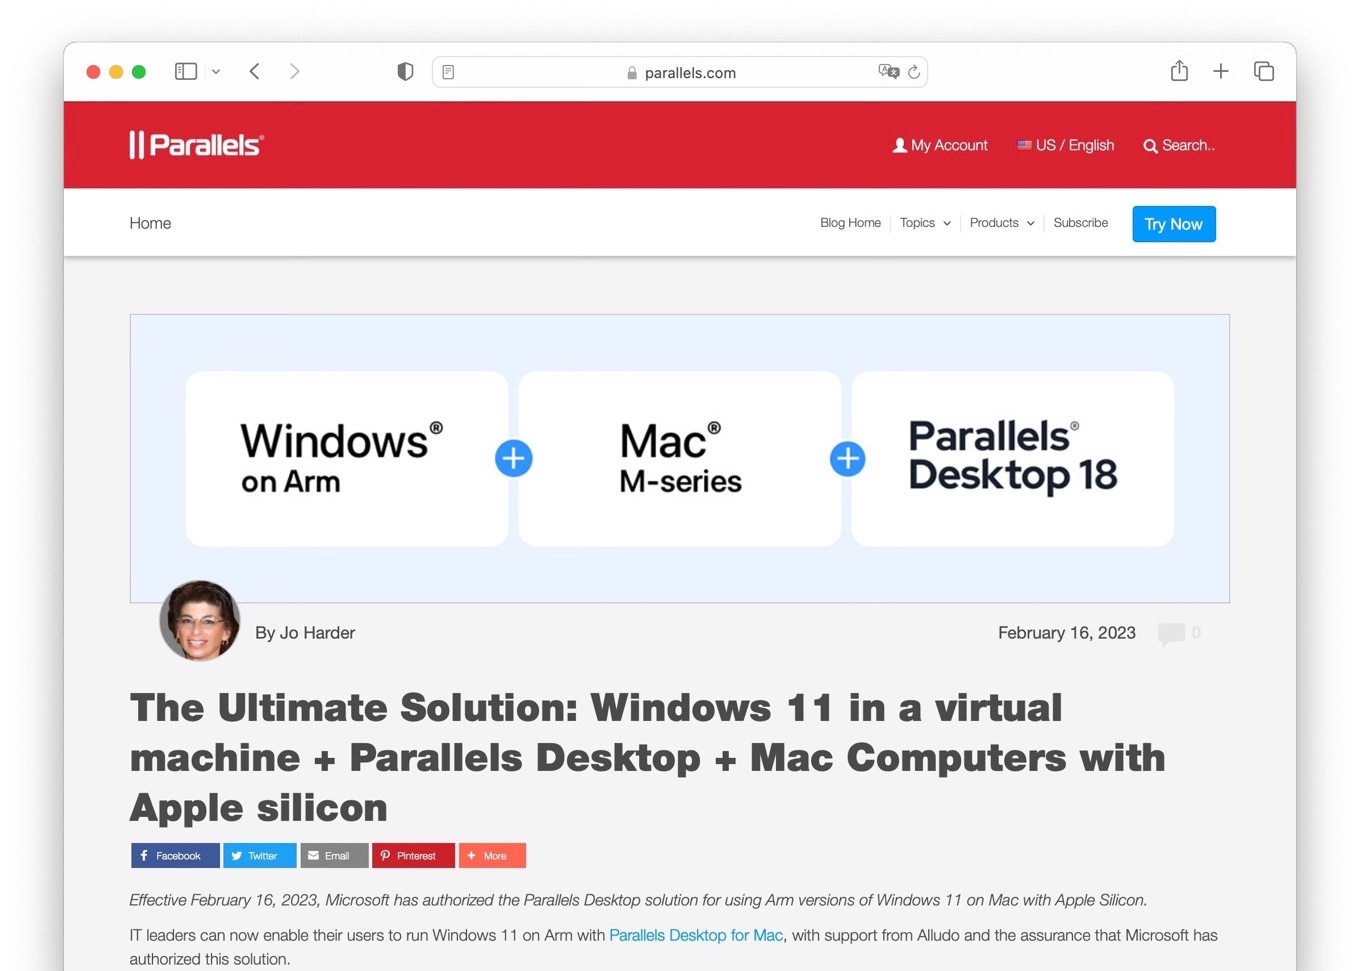 Microsoft authorize Windows 11 on ARM with Parallels Desktop for Mac